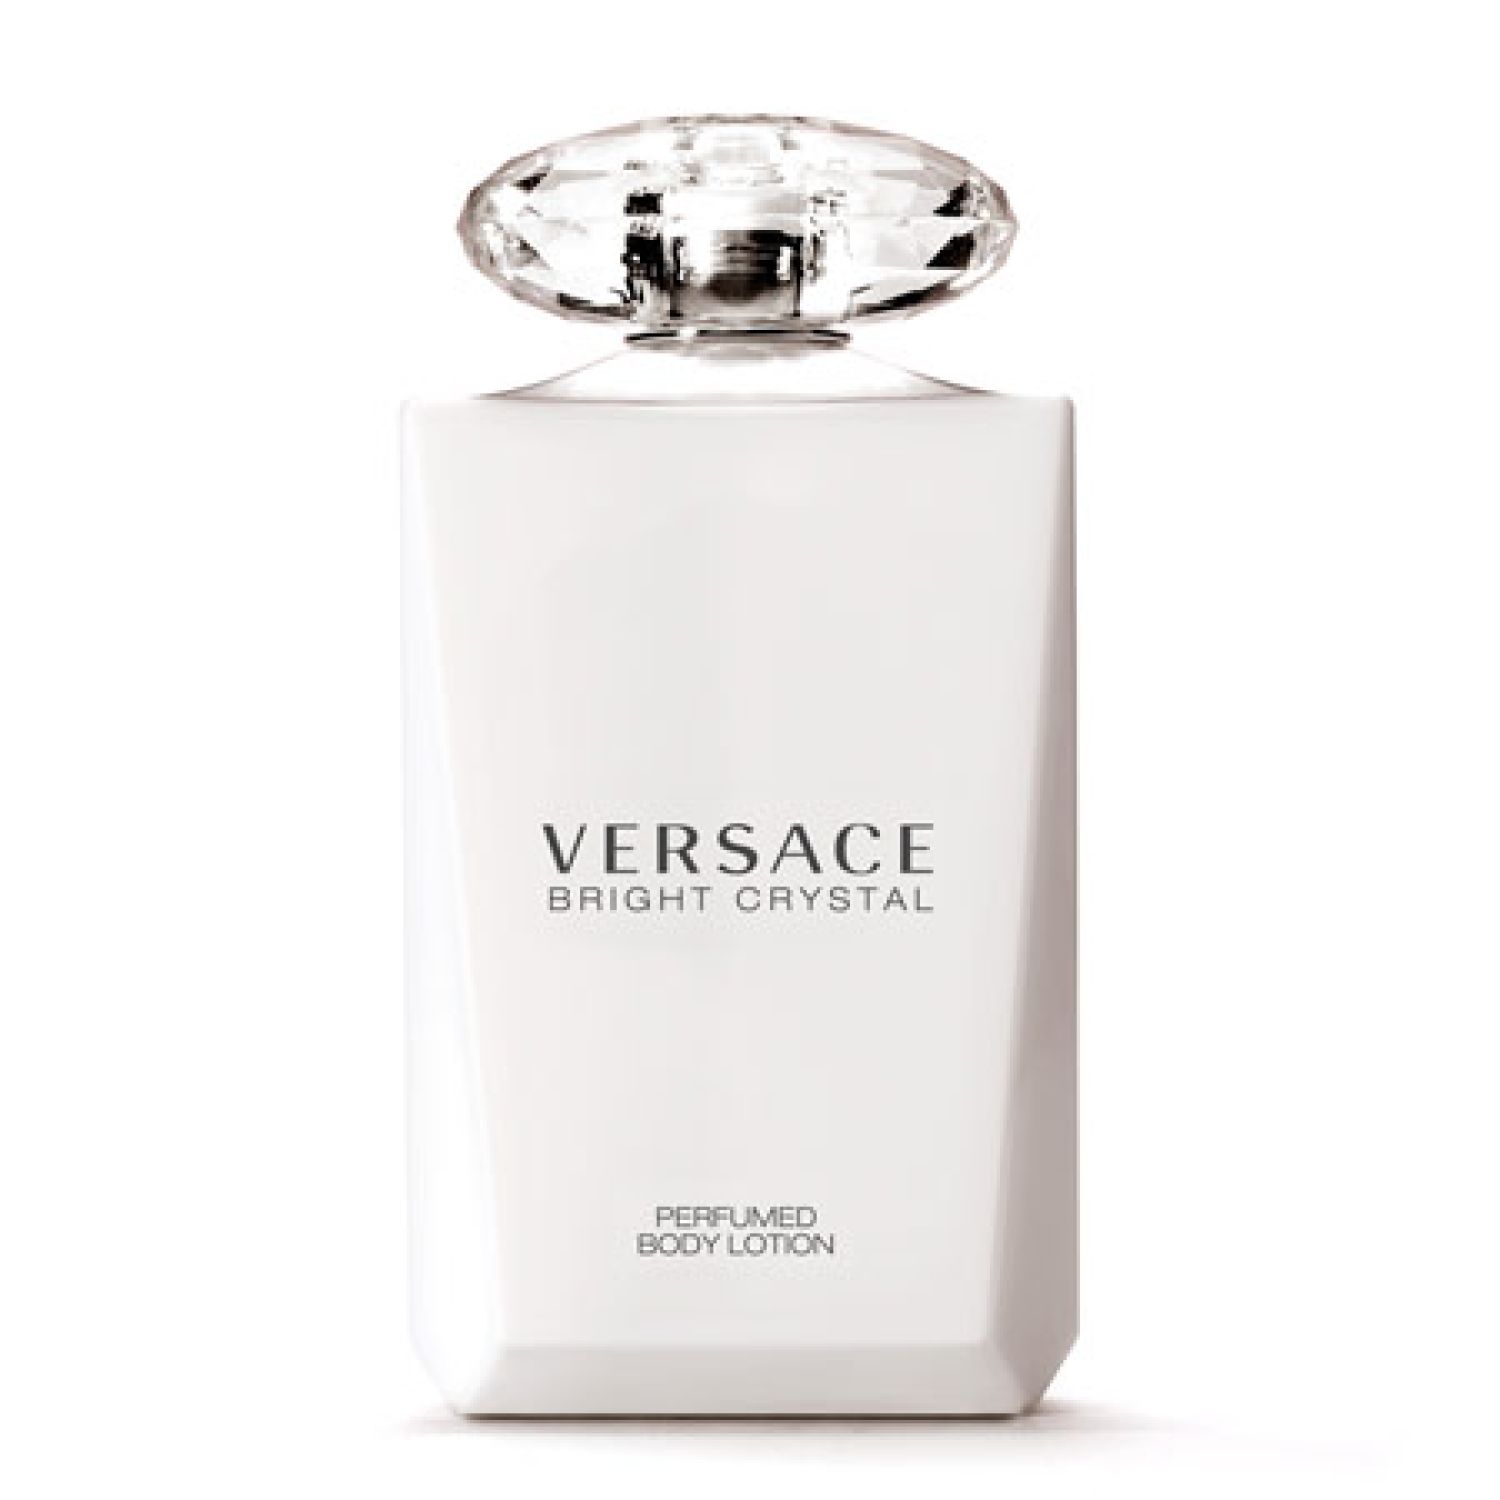 Versace Bright Crystal Body Lotion